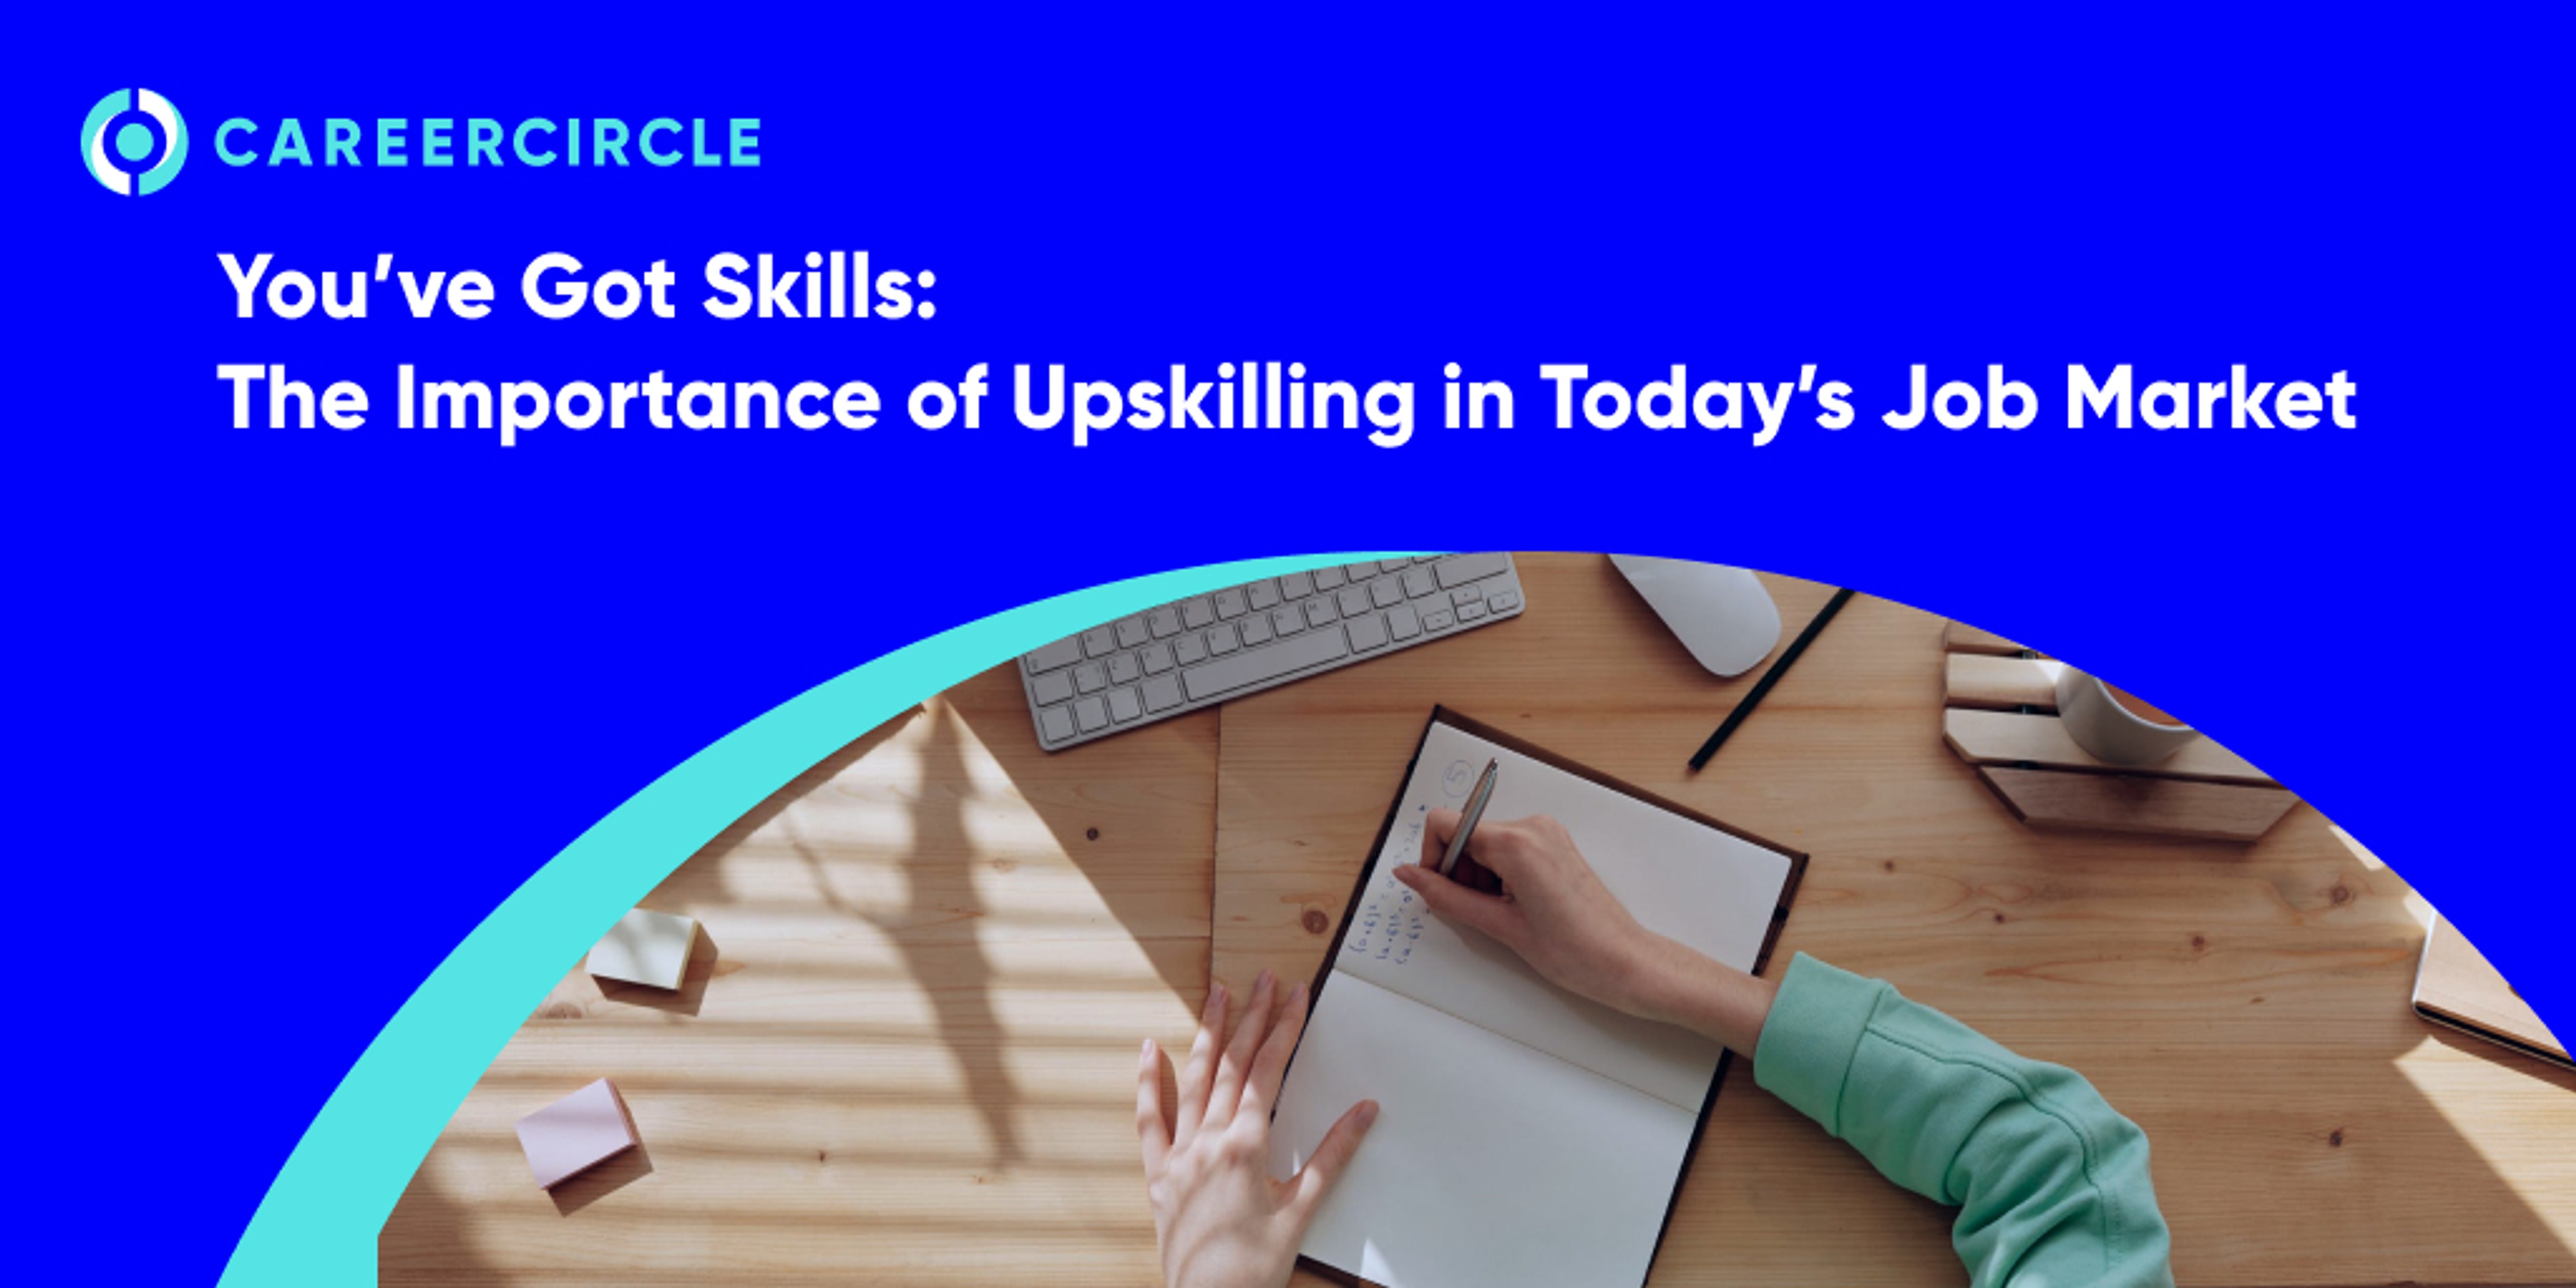 CareerCircle - "You've Got Skills: The Importance of Upskilling in Today's Job Market" image of someone taking notes